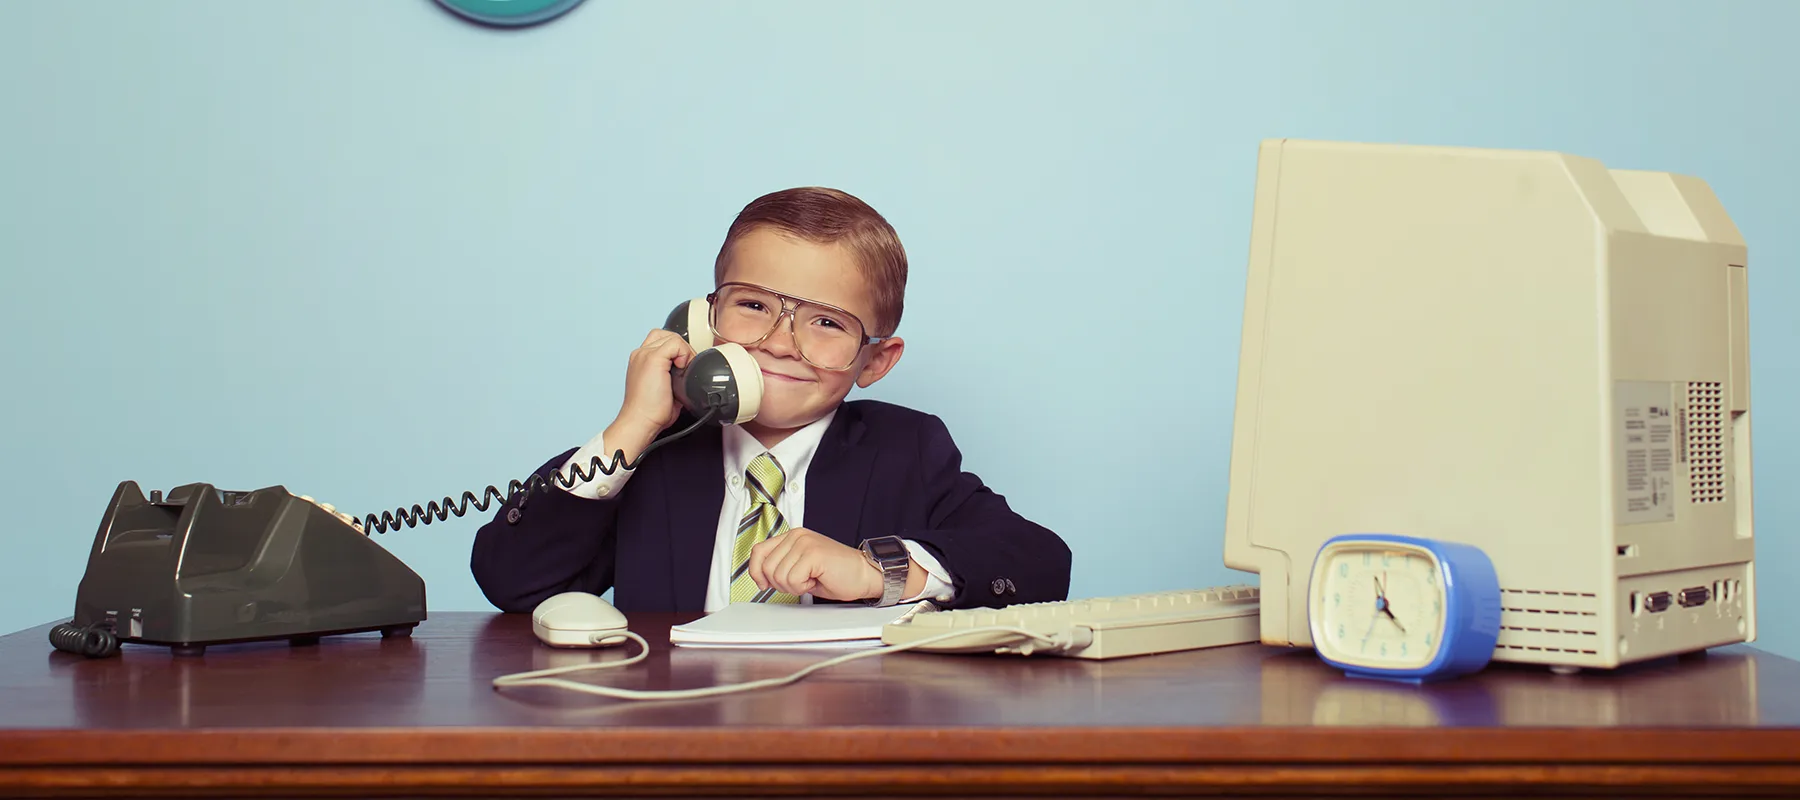 Homage to a vintage office setup with a child in a suit on the phone